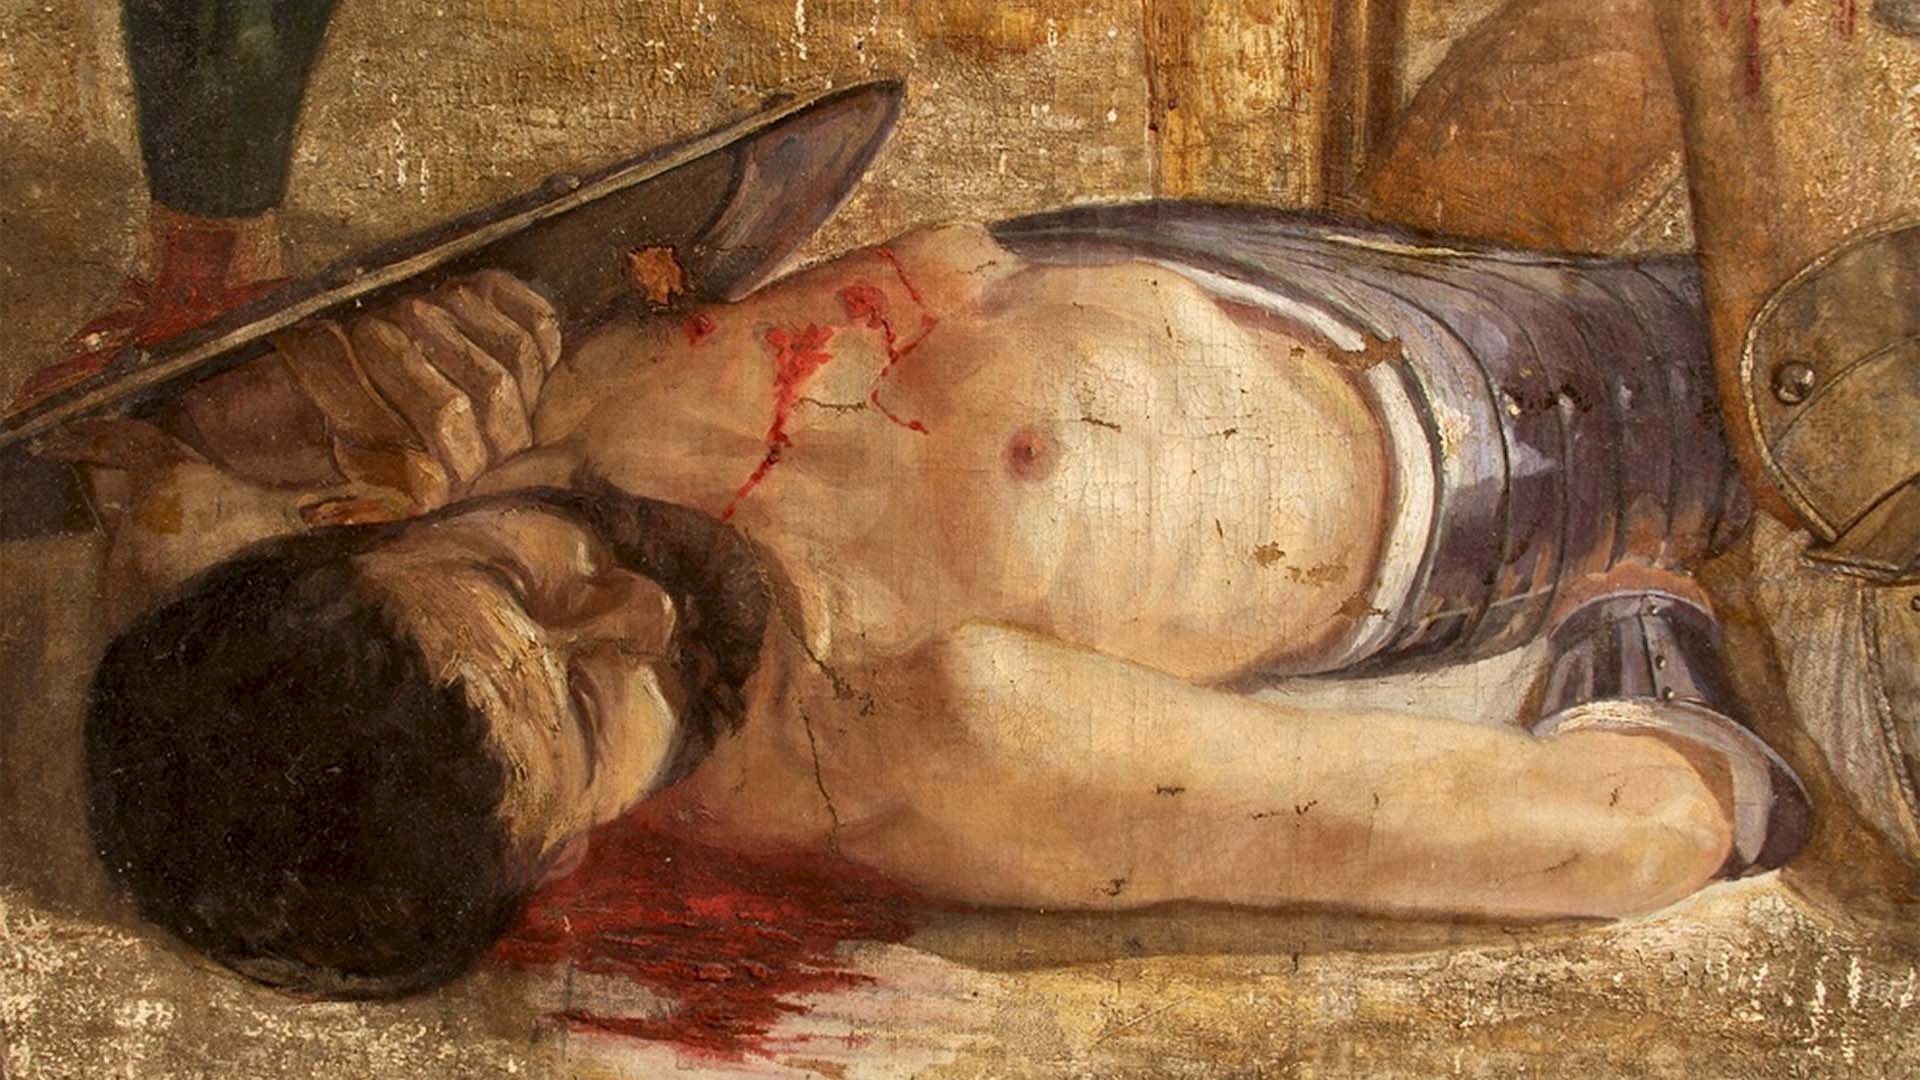 Did most Roman gladiator fights end in death?